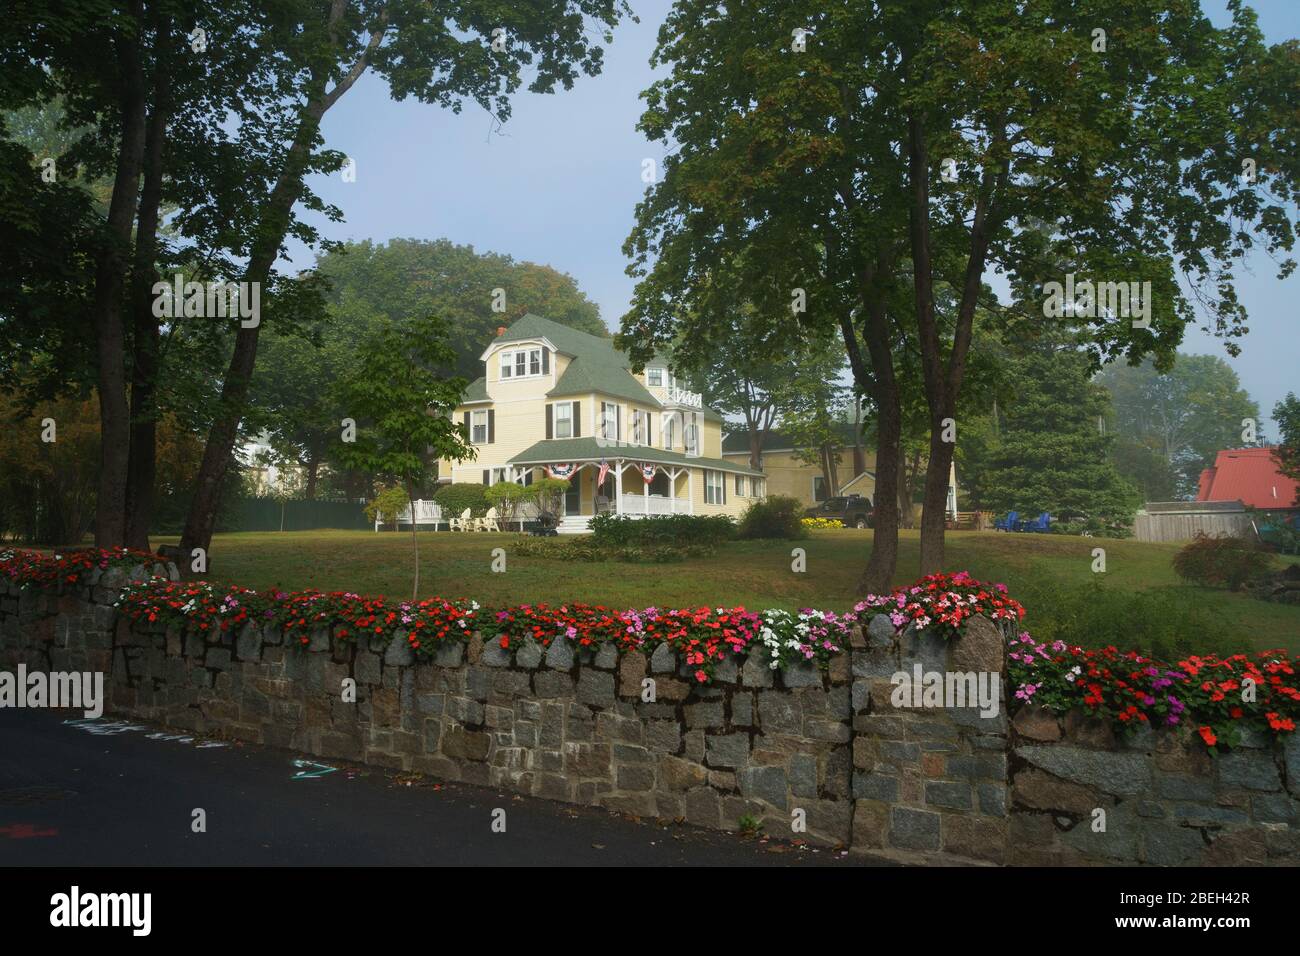 Picturesque three storey house with an expansive lawn bordered by a stone wall covered with flowers. Bar Harbor, Maine, USA. Stock Photo